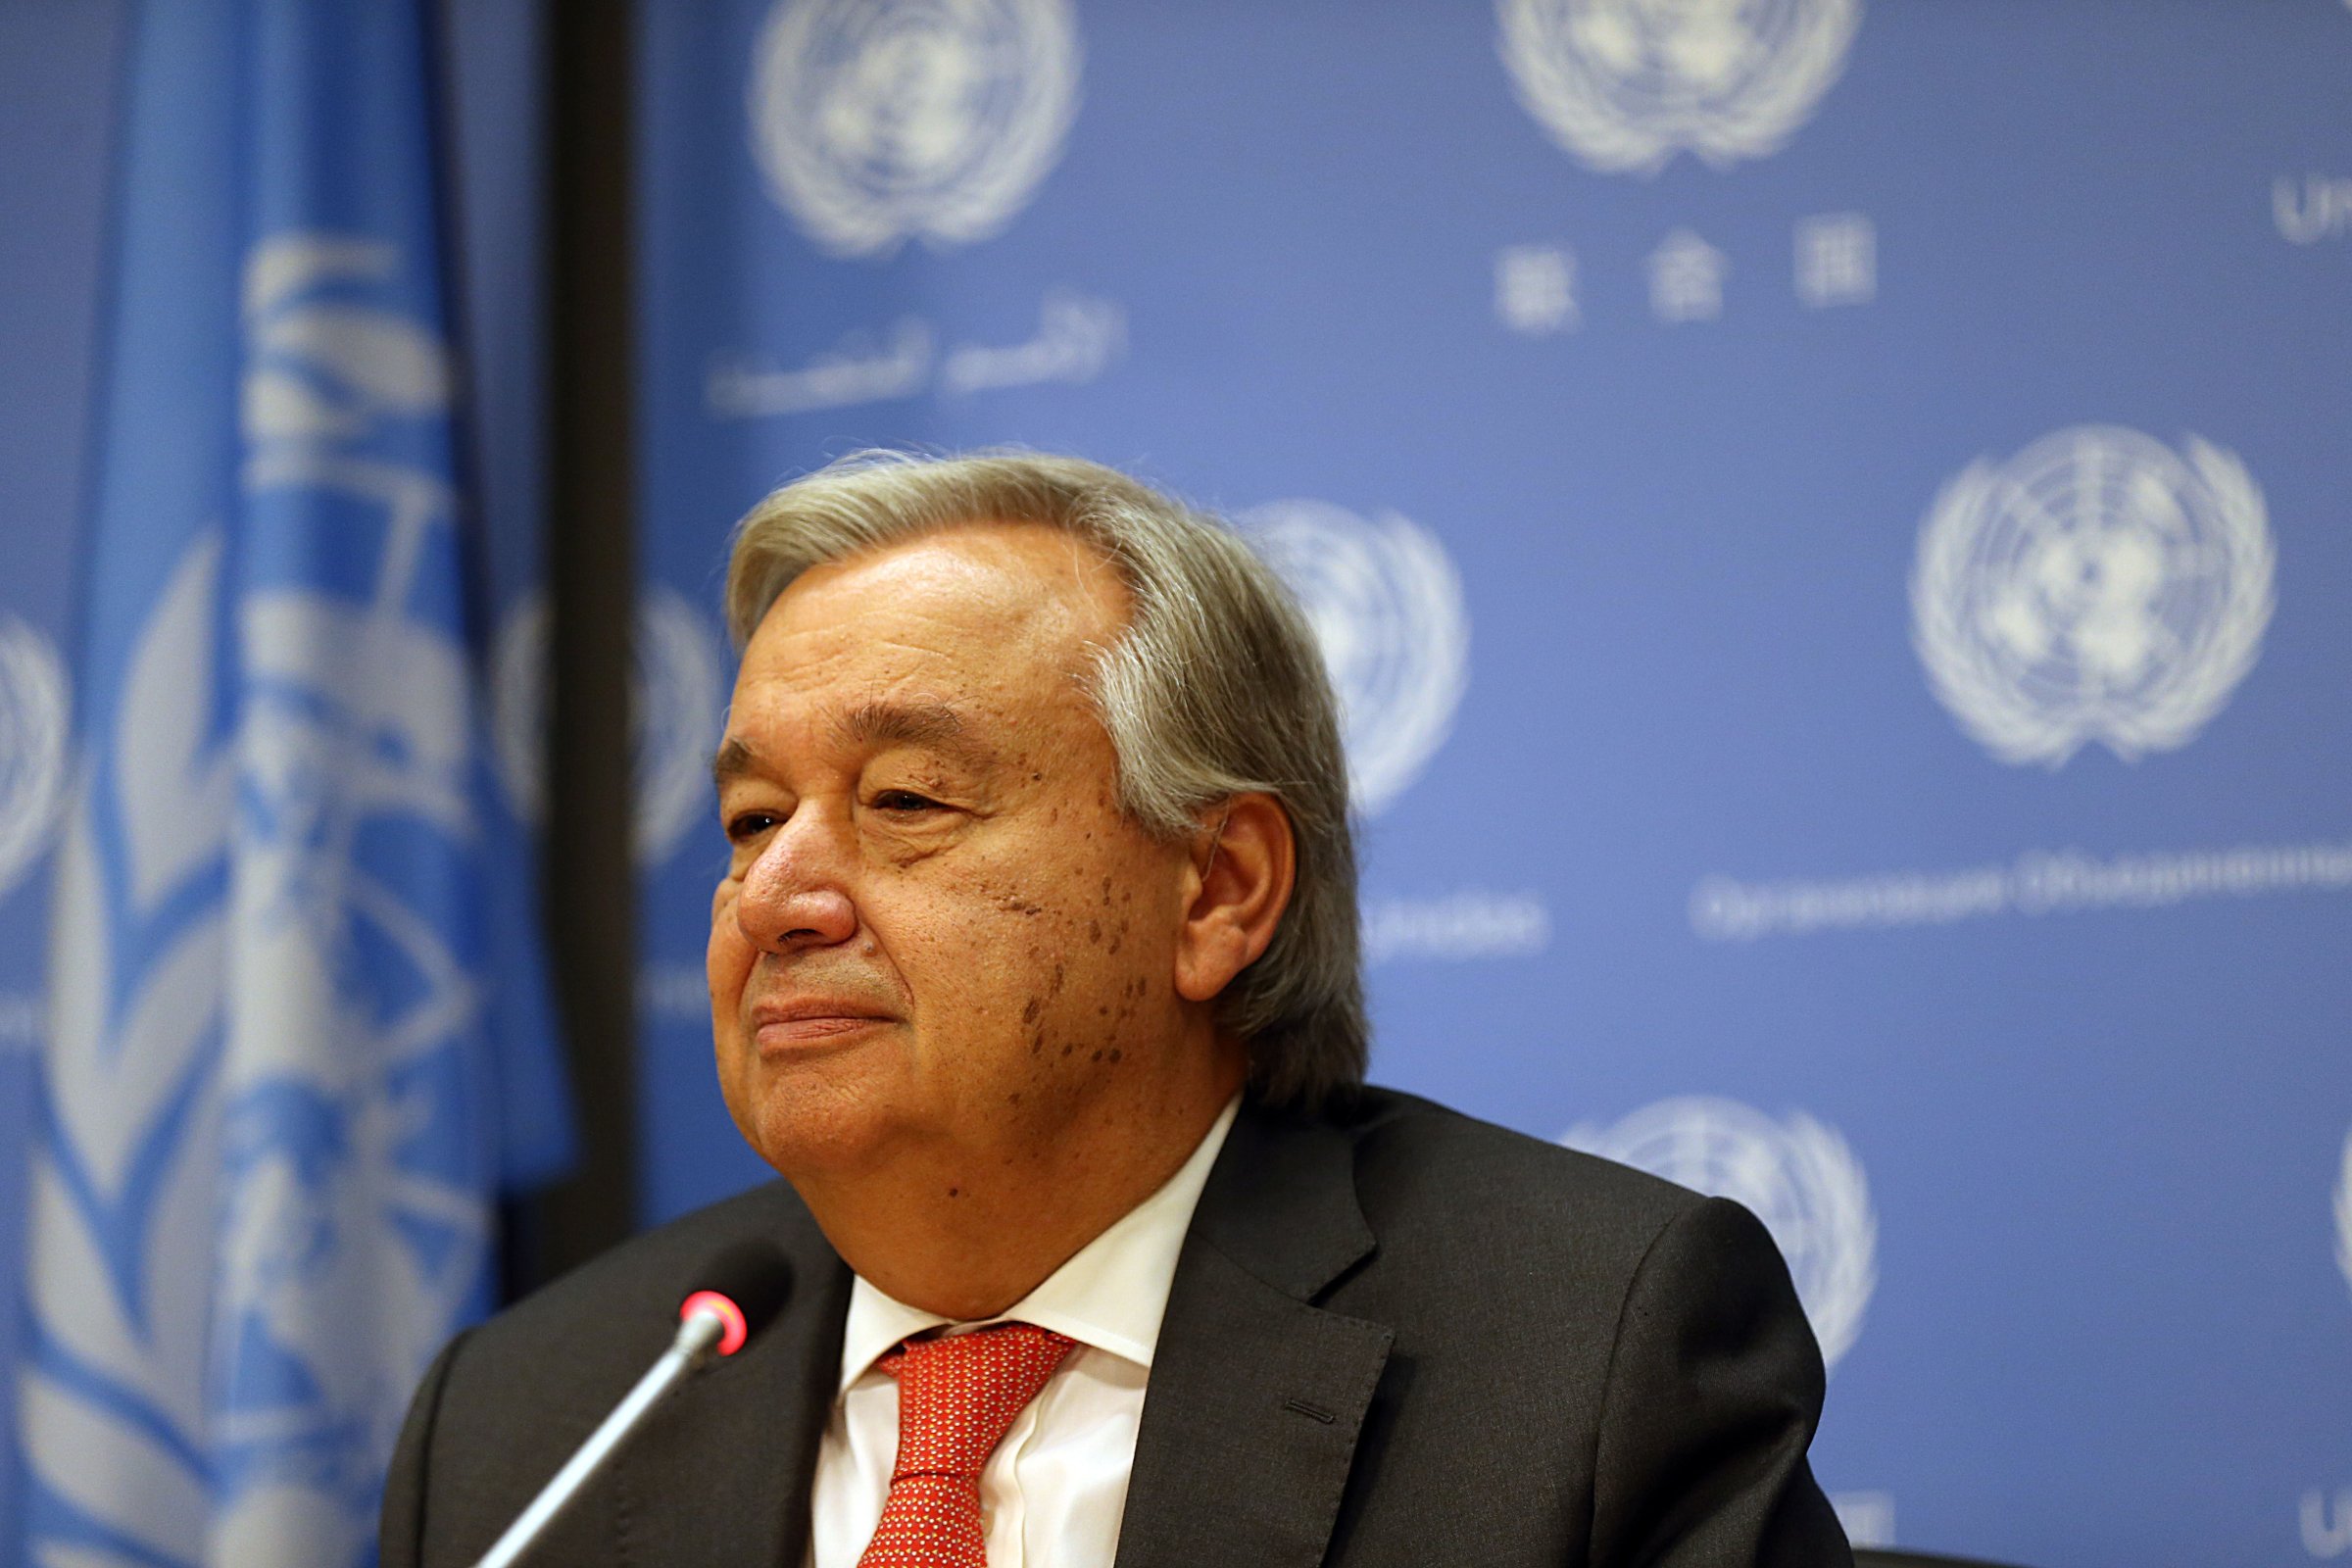 United Nations Secretary-General António Guterres Press Conference